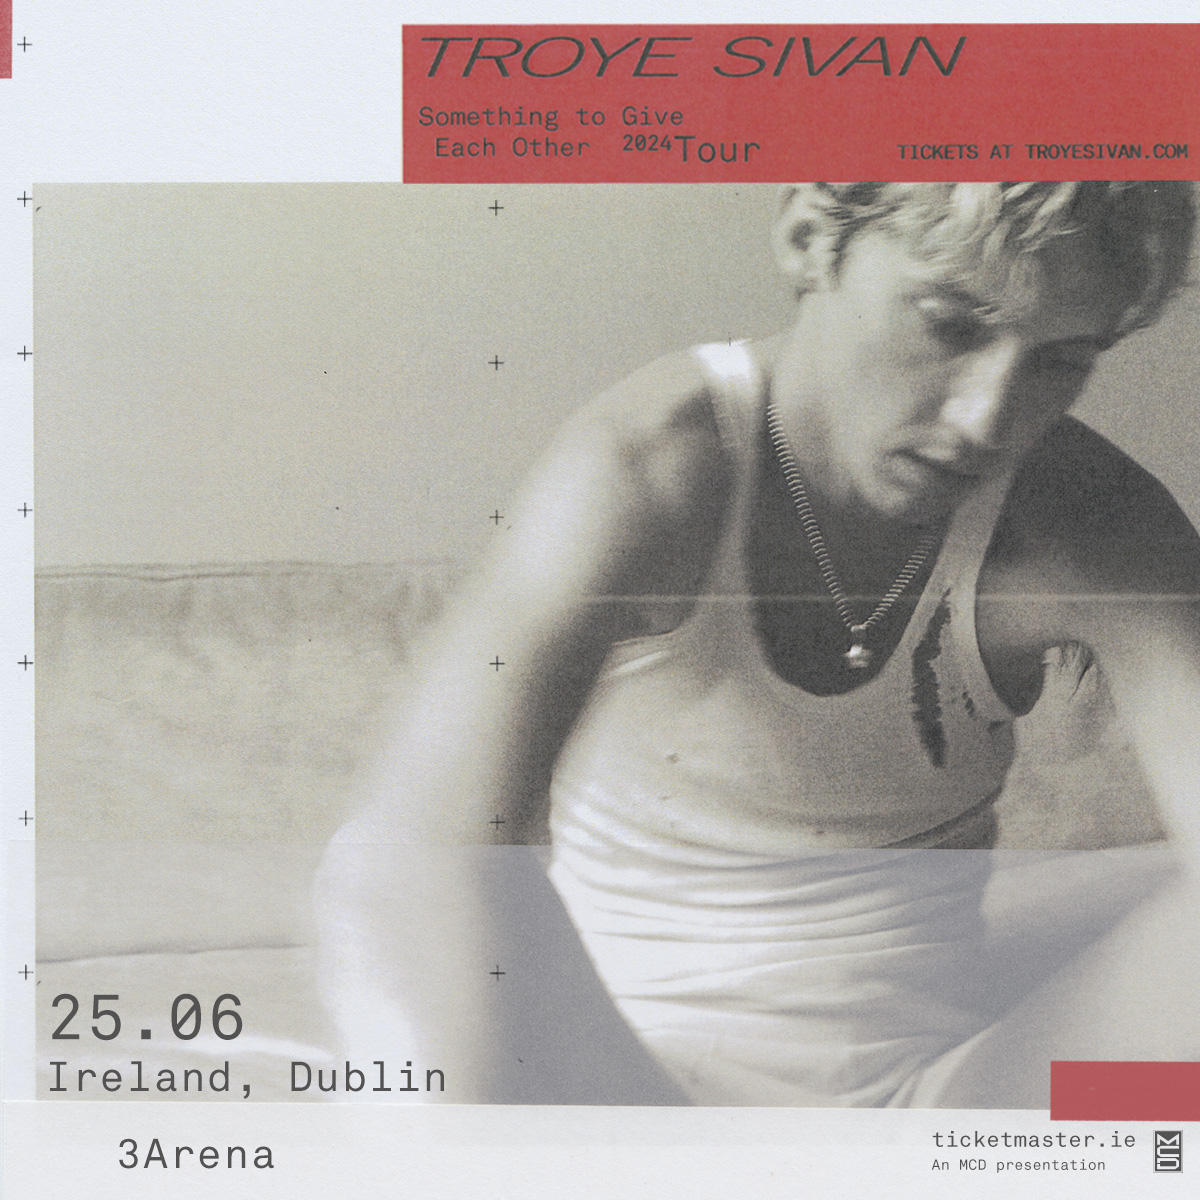 TROYE SIVAN ANNOUNCES ‘SOMETHING TO GIVE EACH OTHER TOUR :: INCLUDING 3ARENA DUBLIN, 25 JUNE 2024